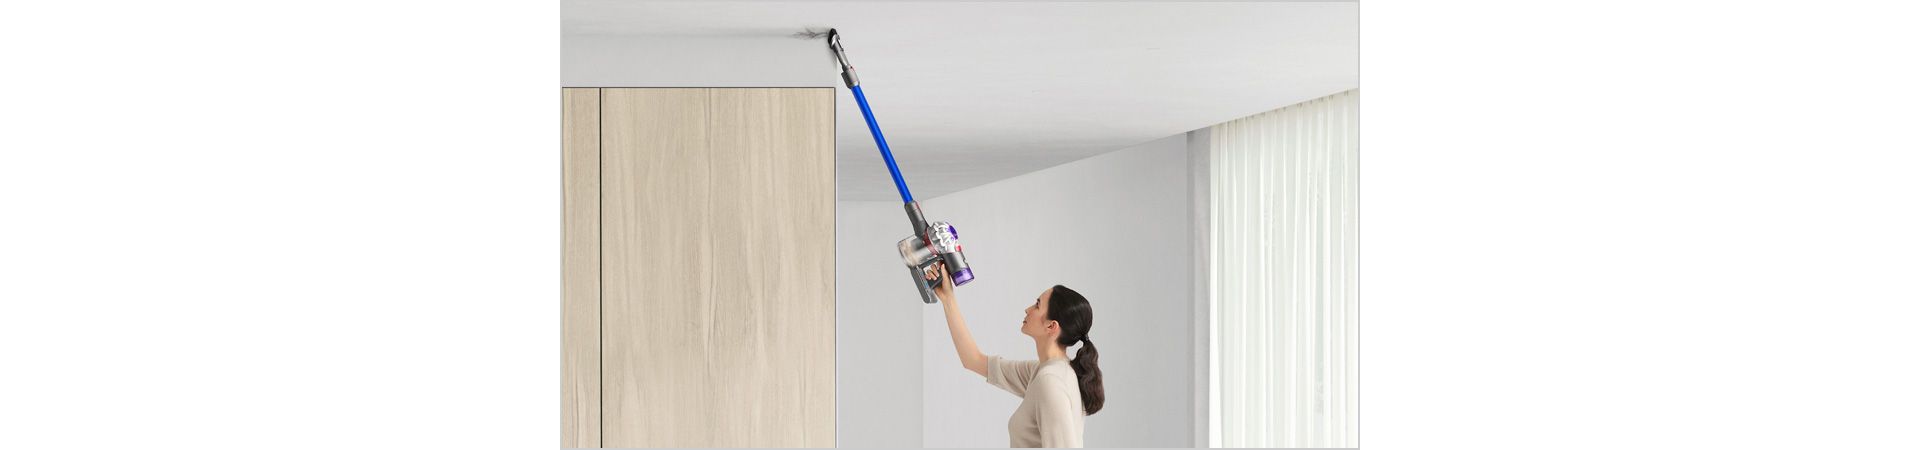 Woman cleaning up high with Dyson V7 Advanced vacuum